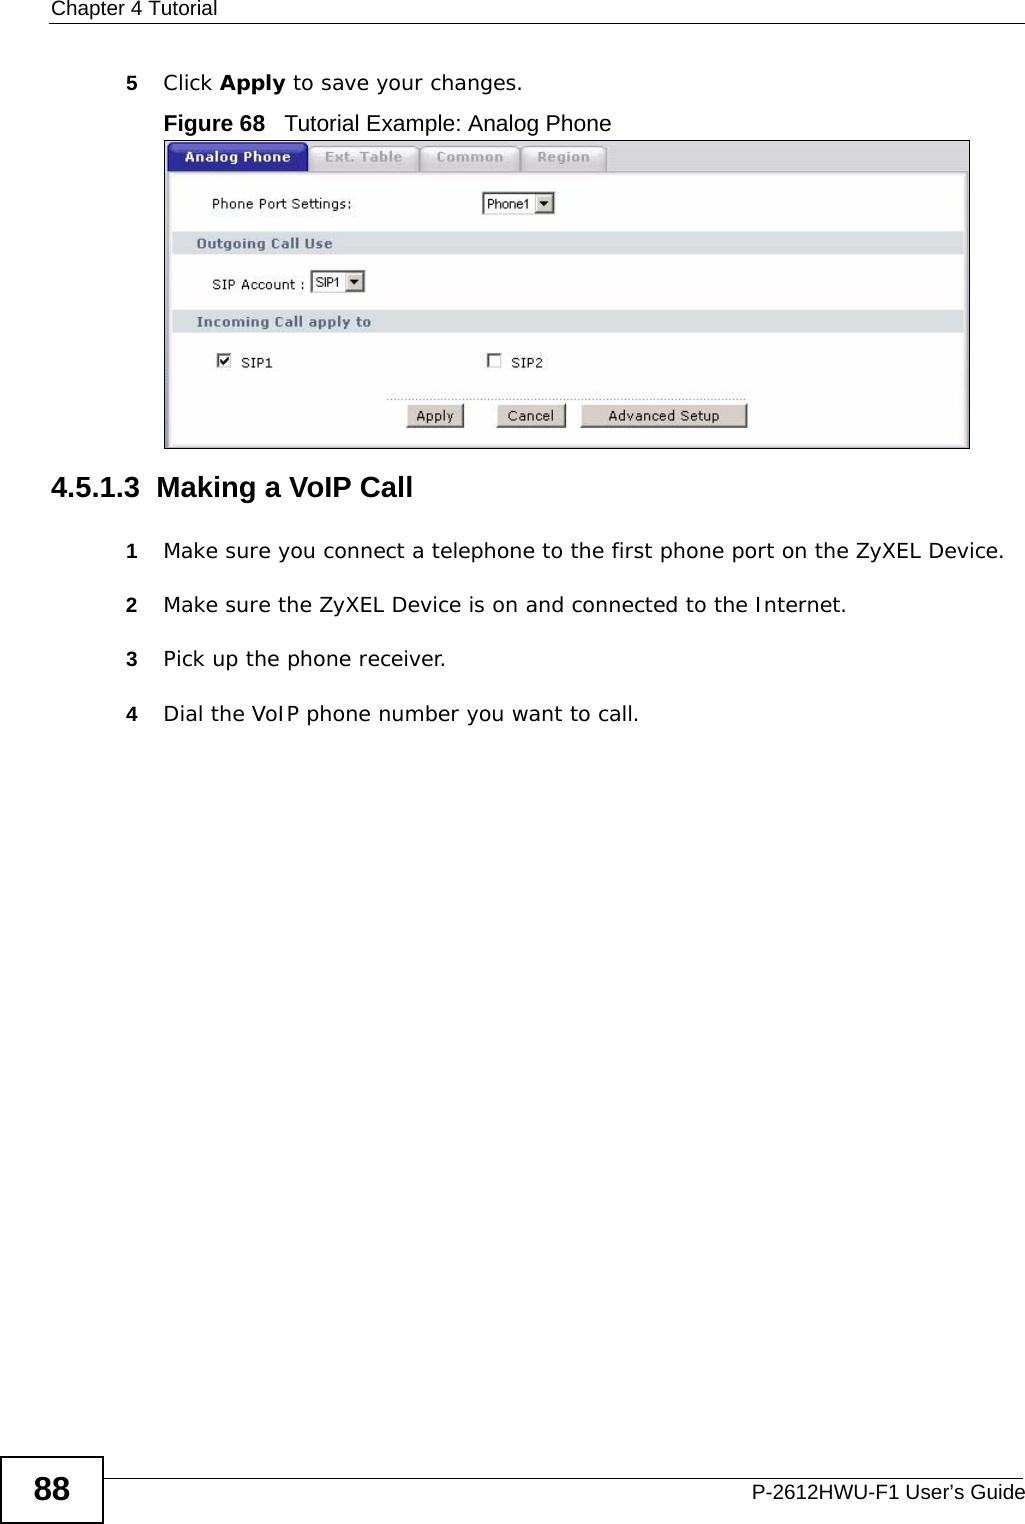 Chapter 4 TutorialP-2612HWU-F1 User’s Guide885Click Apply to save your changes.Figure 68   Tutorial Example: Analog Phone4.5.1.3  Making a VoIP Call 1Make sure you connect a telephone to the first phone port on the ZyXEL Device.2Make sure the ZyXEL Device is on and connected to the Internet.3Pick up the phone receiver.4Dial the VoIP phone number you want to call.